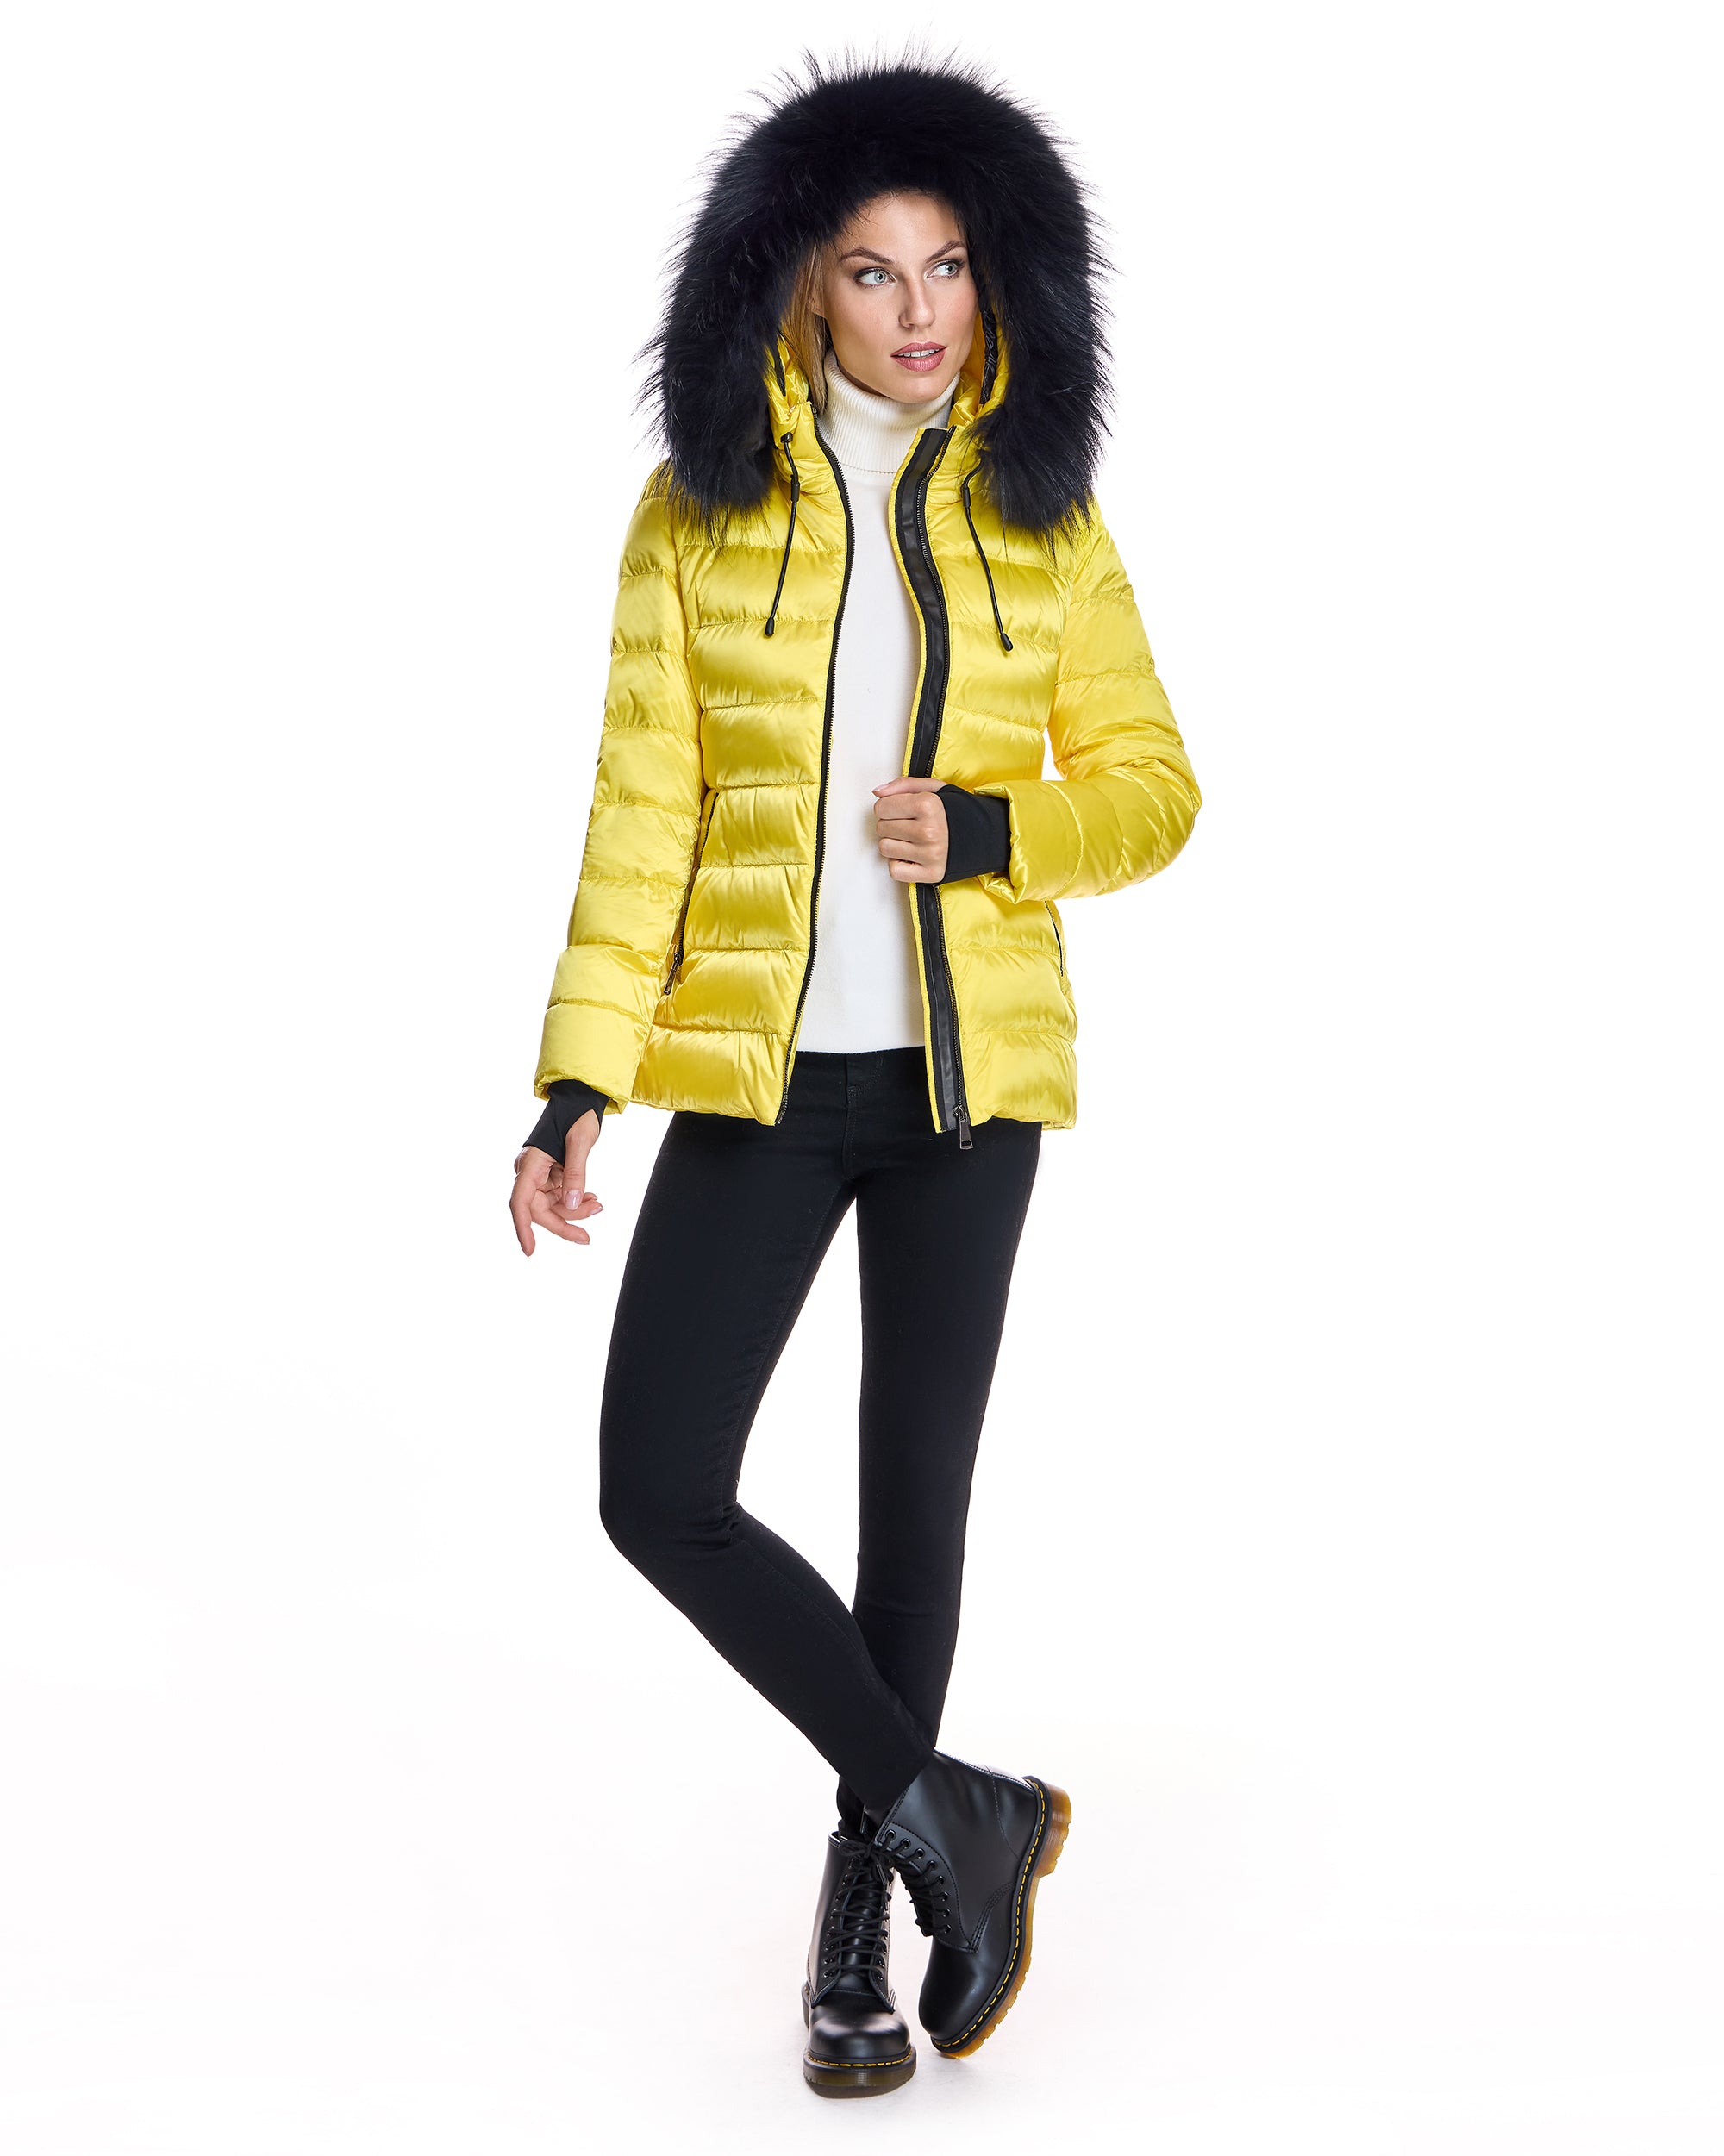 Nylon Puffer Jacket with Raccoon Trimmed Hood